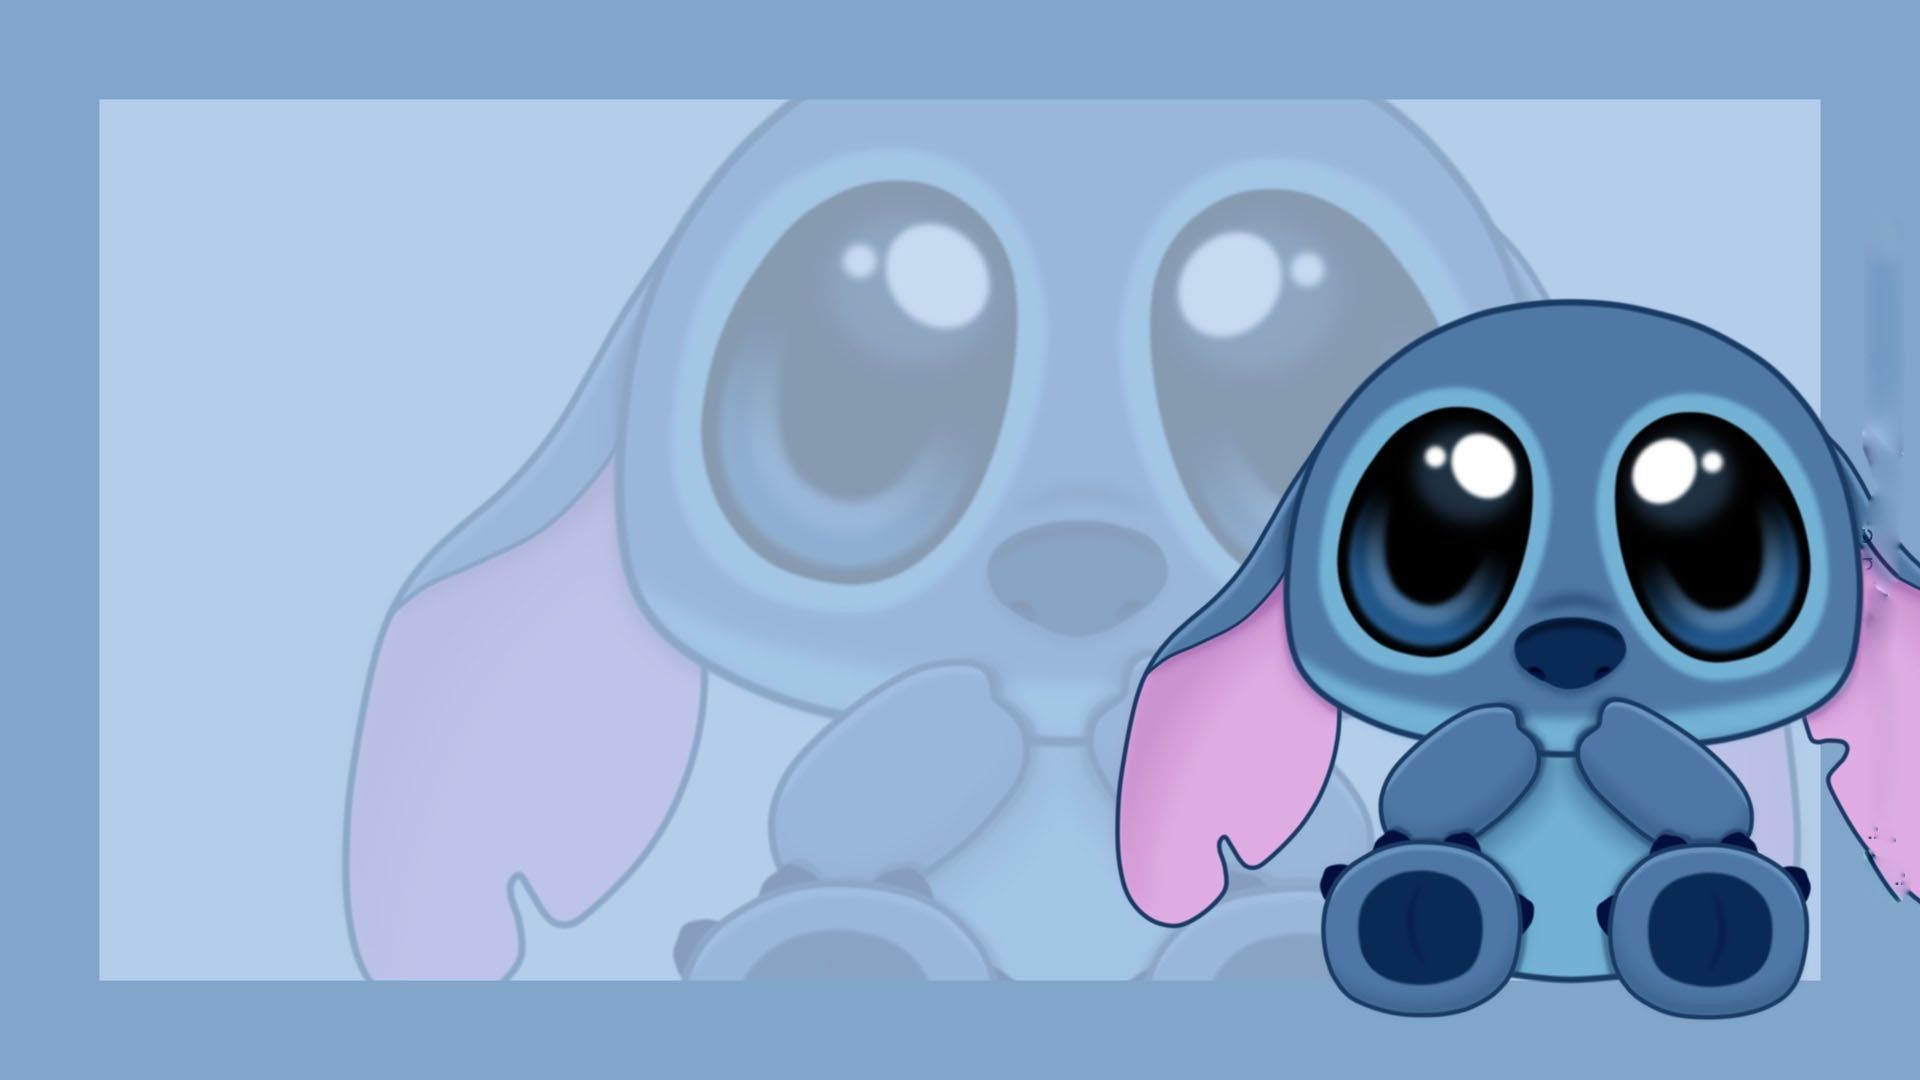 Wallpaper Adorable Stitch Wallpapers